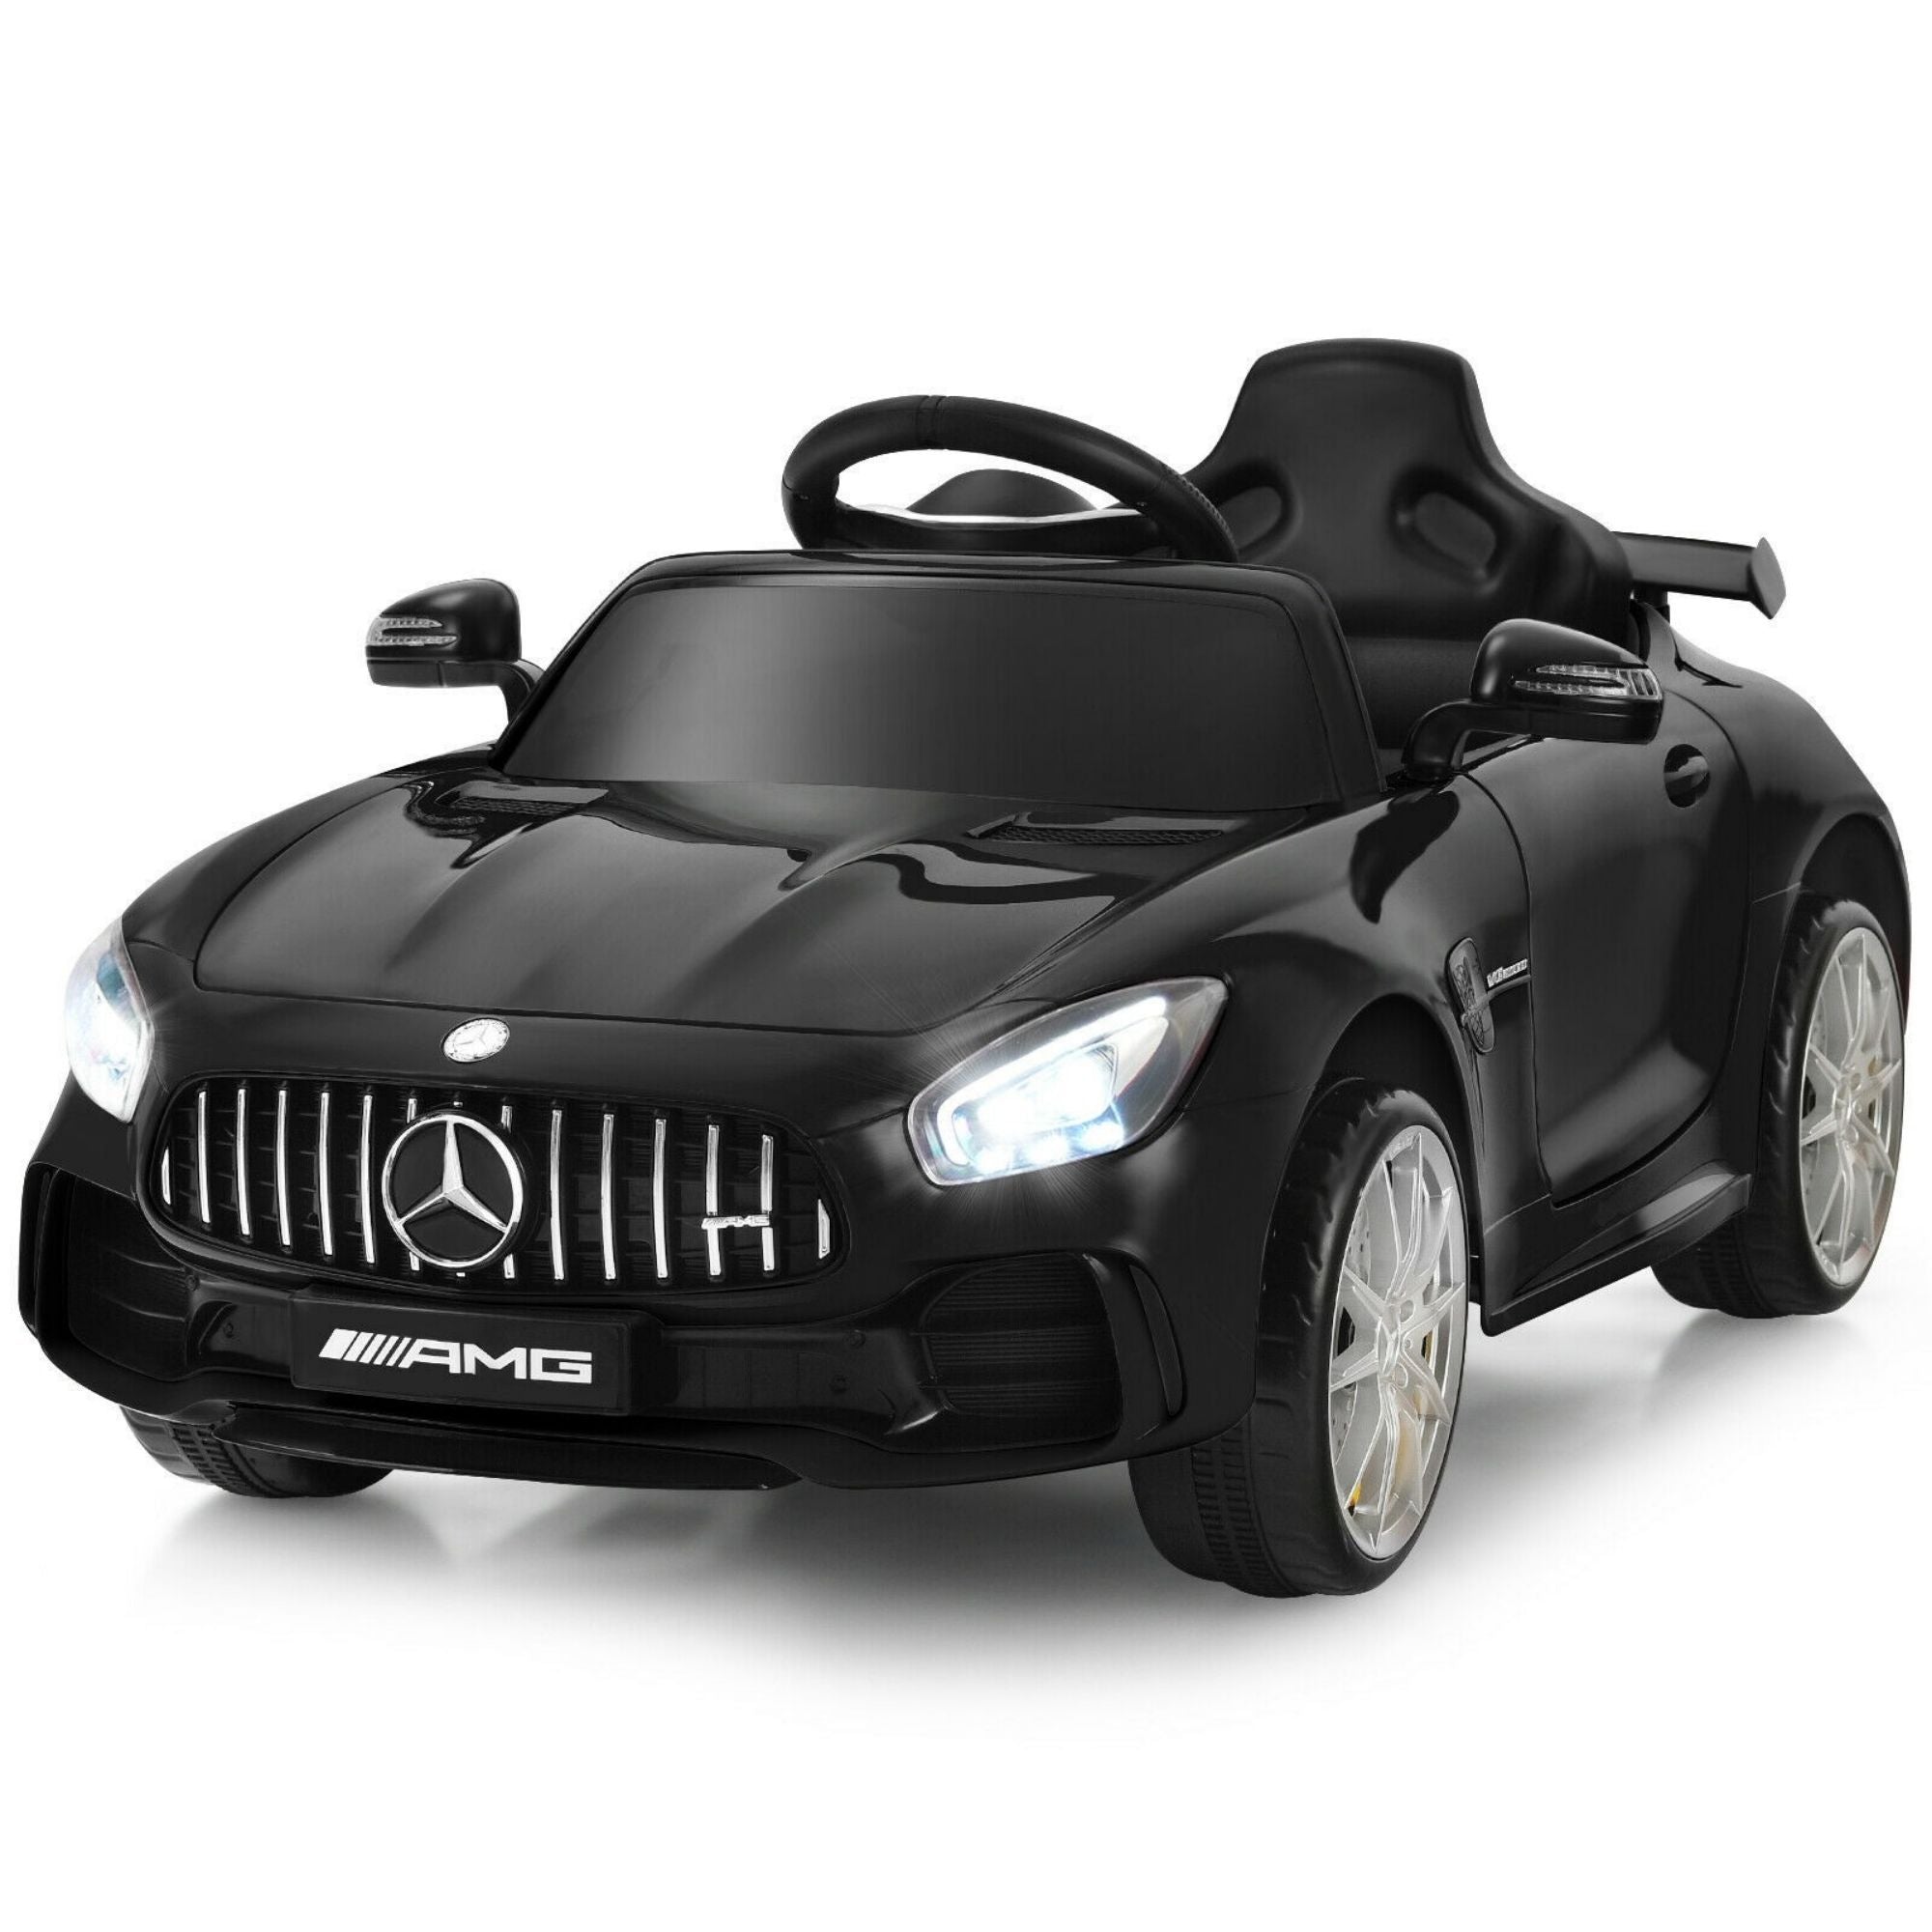 12V Licensed Mercedes Benz Kids Ride-On Car with Remote Contro